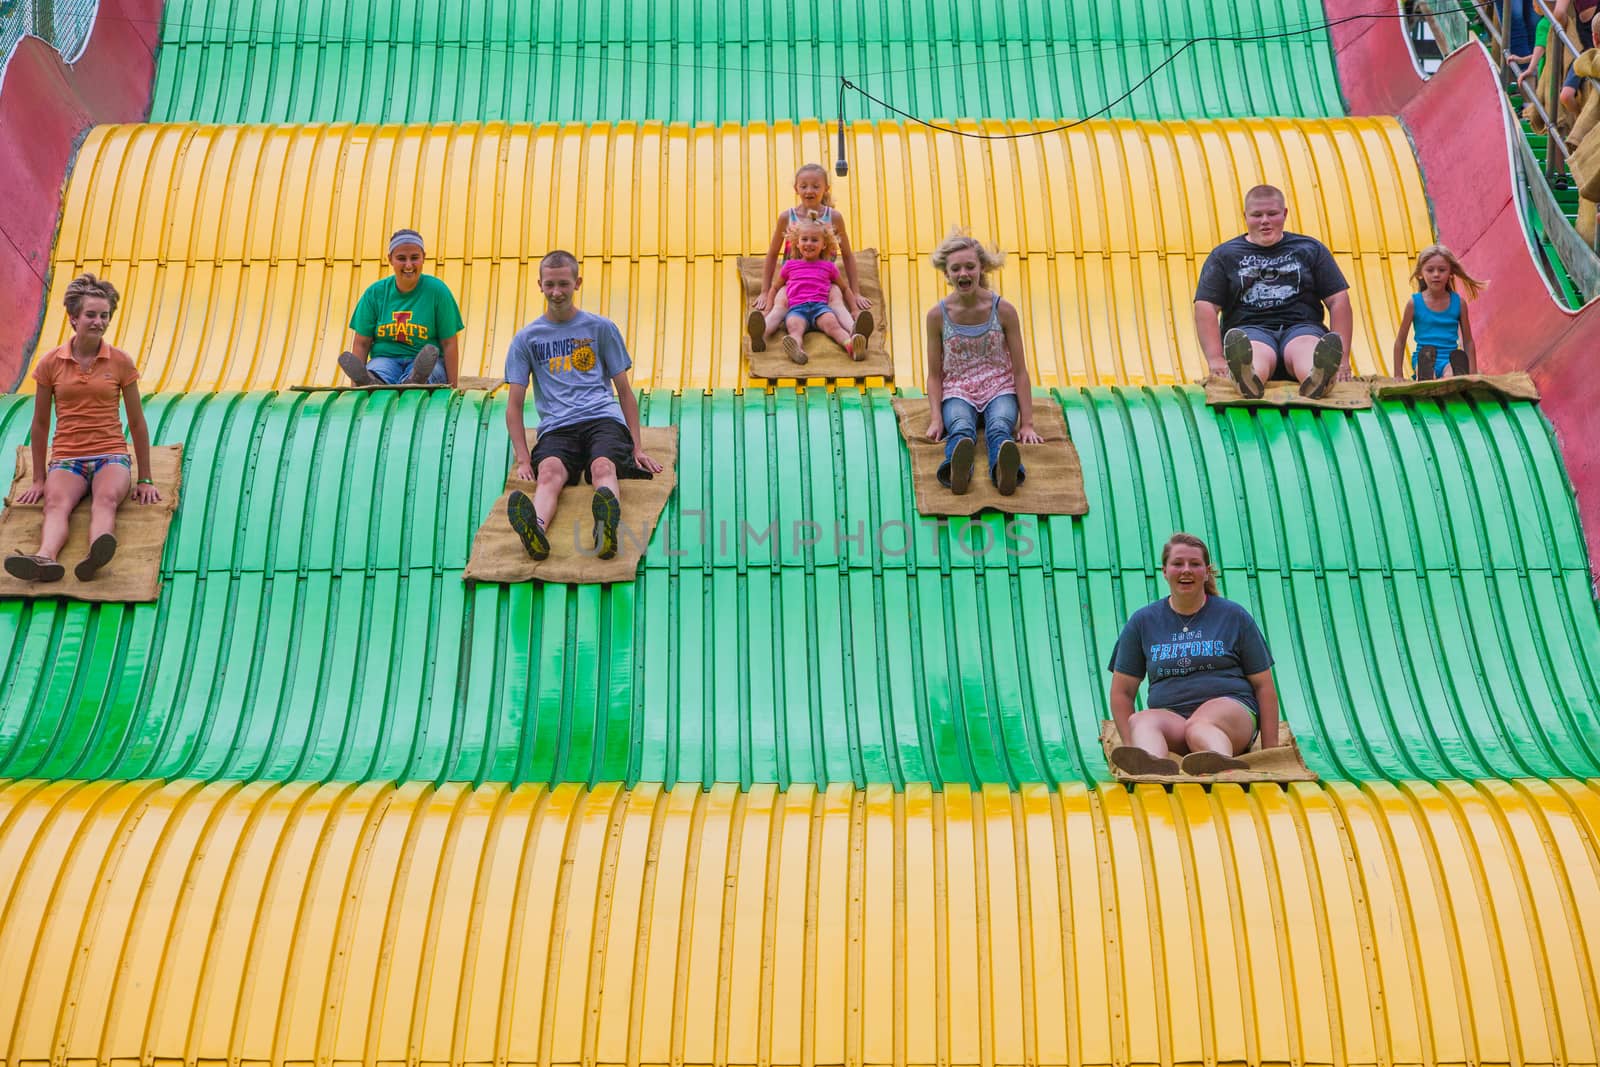 DES MOINES, IA /USA - AUGUST 10: Unidentified children on jumbo slide at the Iowa State Fair on August 10, 2014 in Des Moines, Iowa, USA.